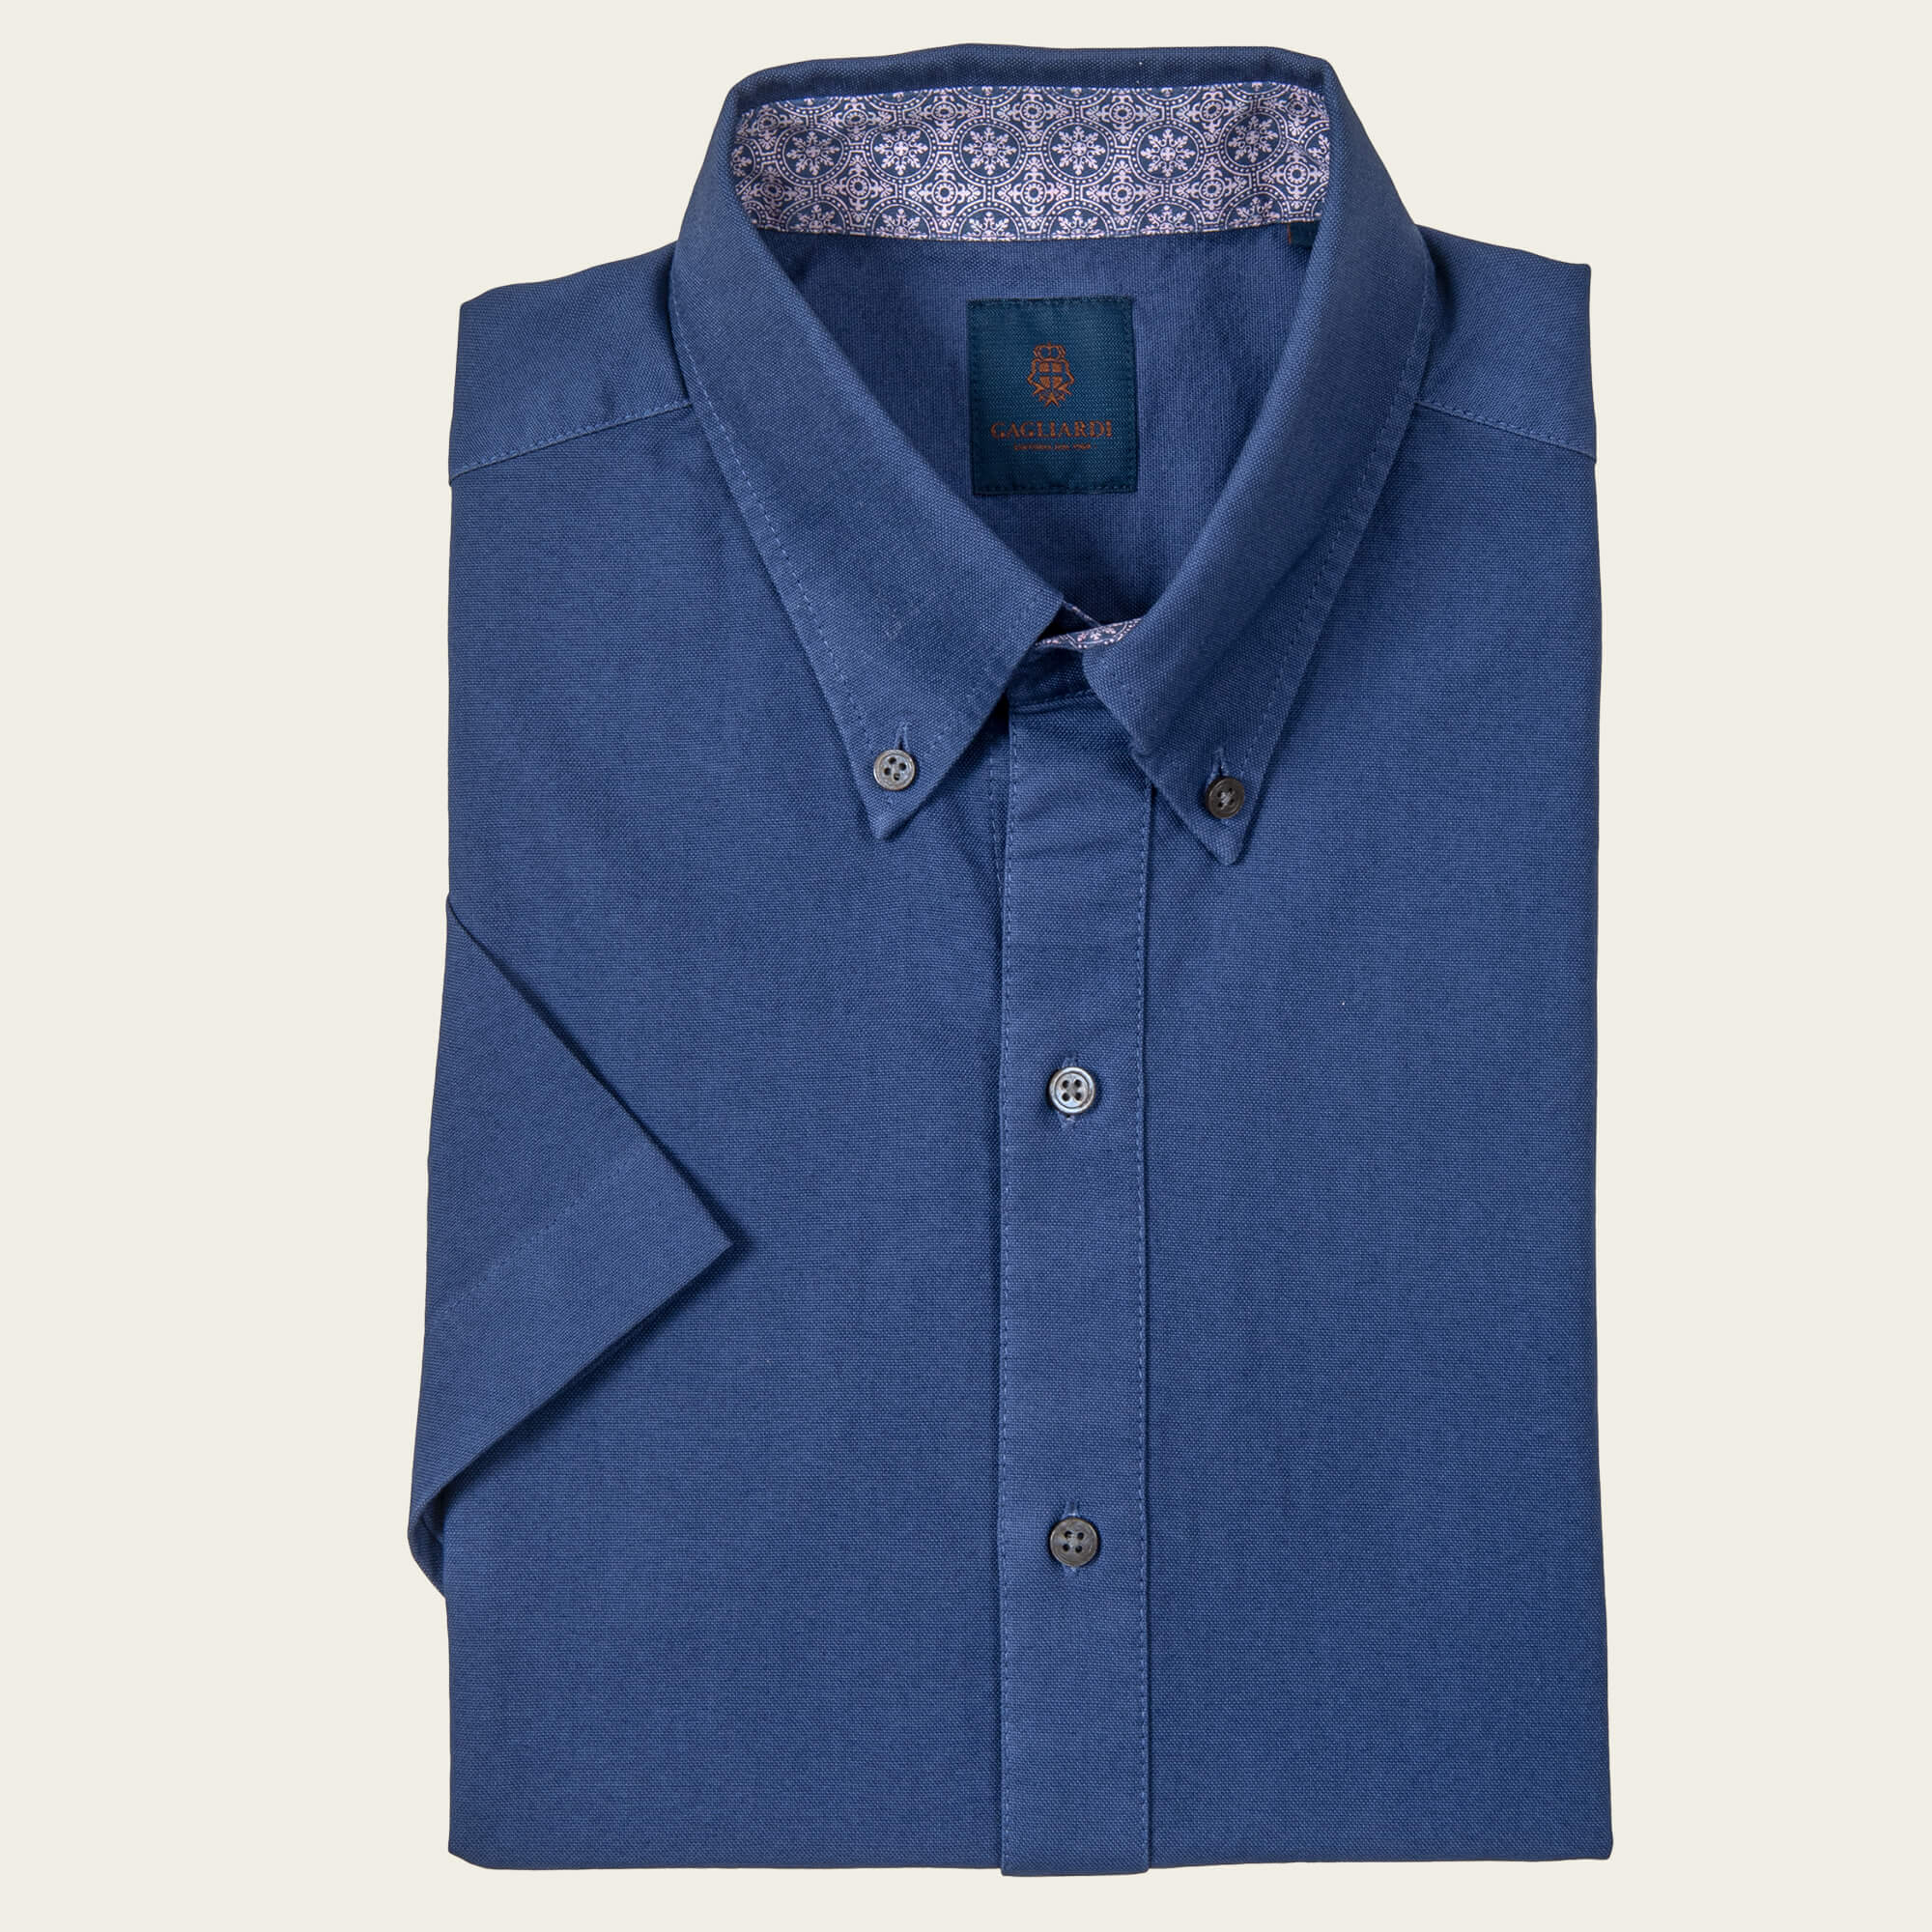 Blue Tailored Fit Oxford Button Down Short Sleeve Shirt